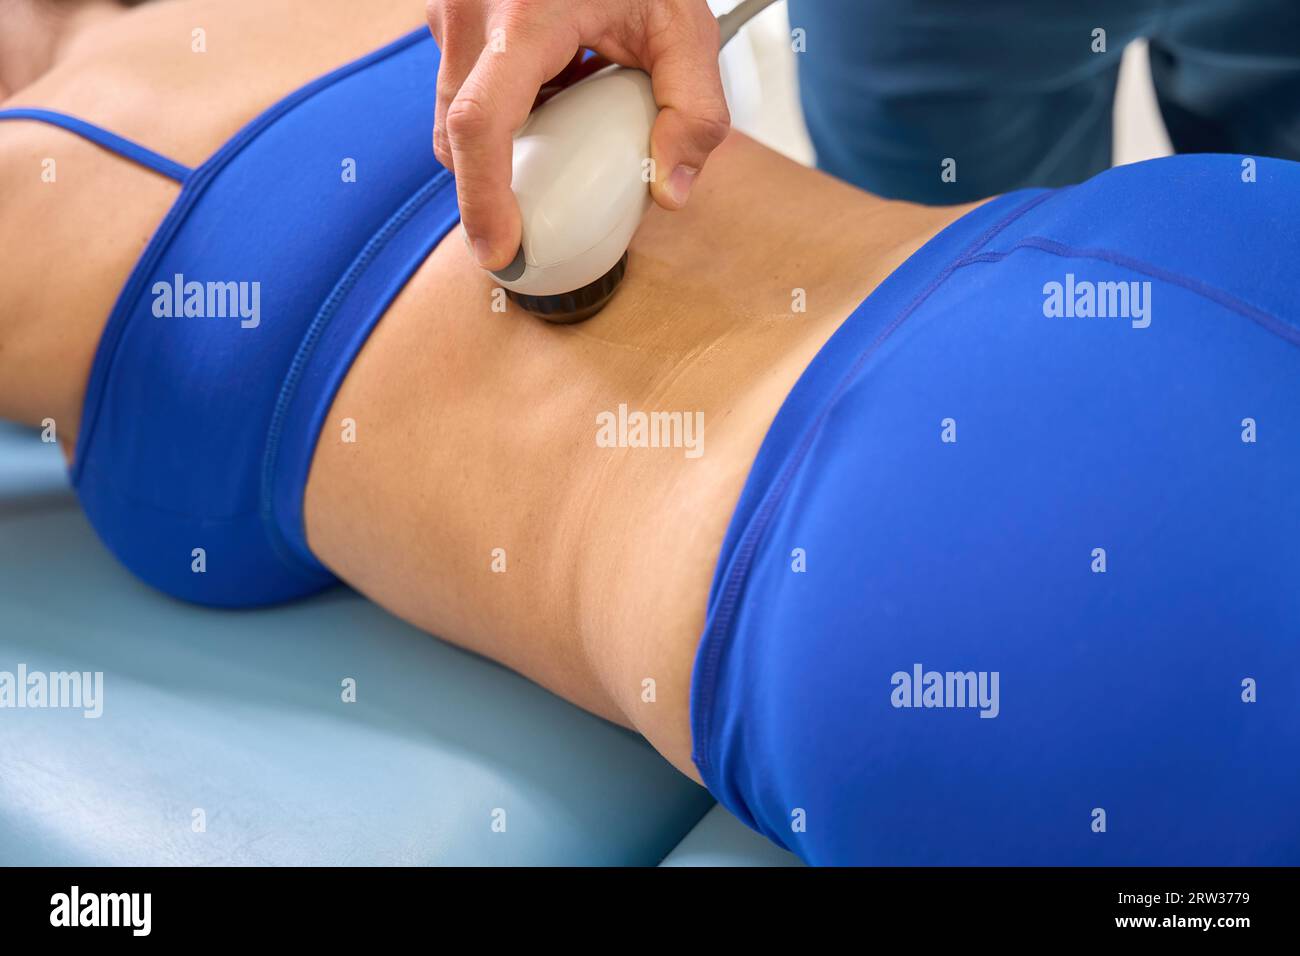 Skilled manual therapist performing extracorporeal shock wave therapy Stock Photo